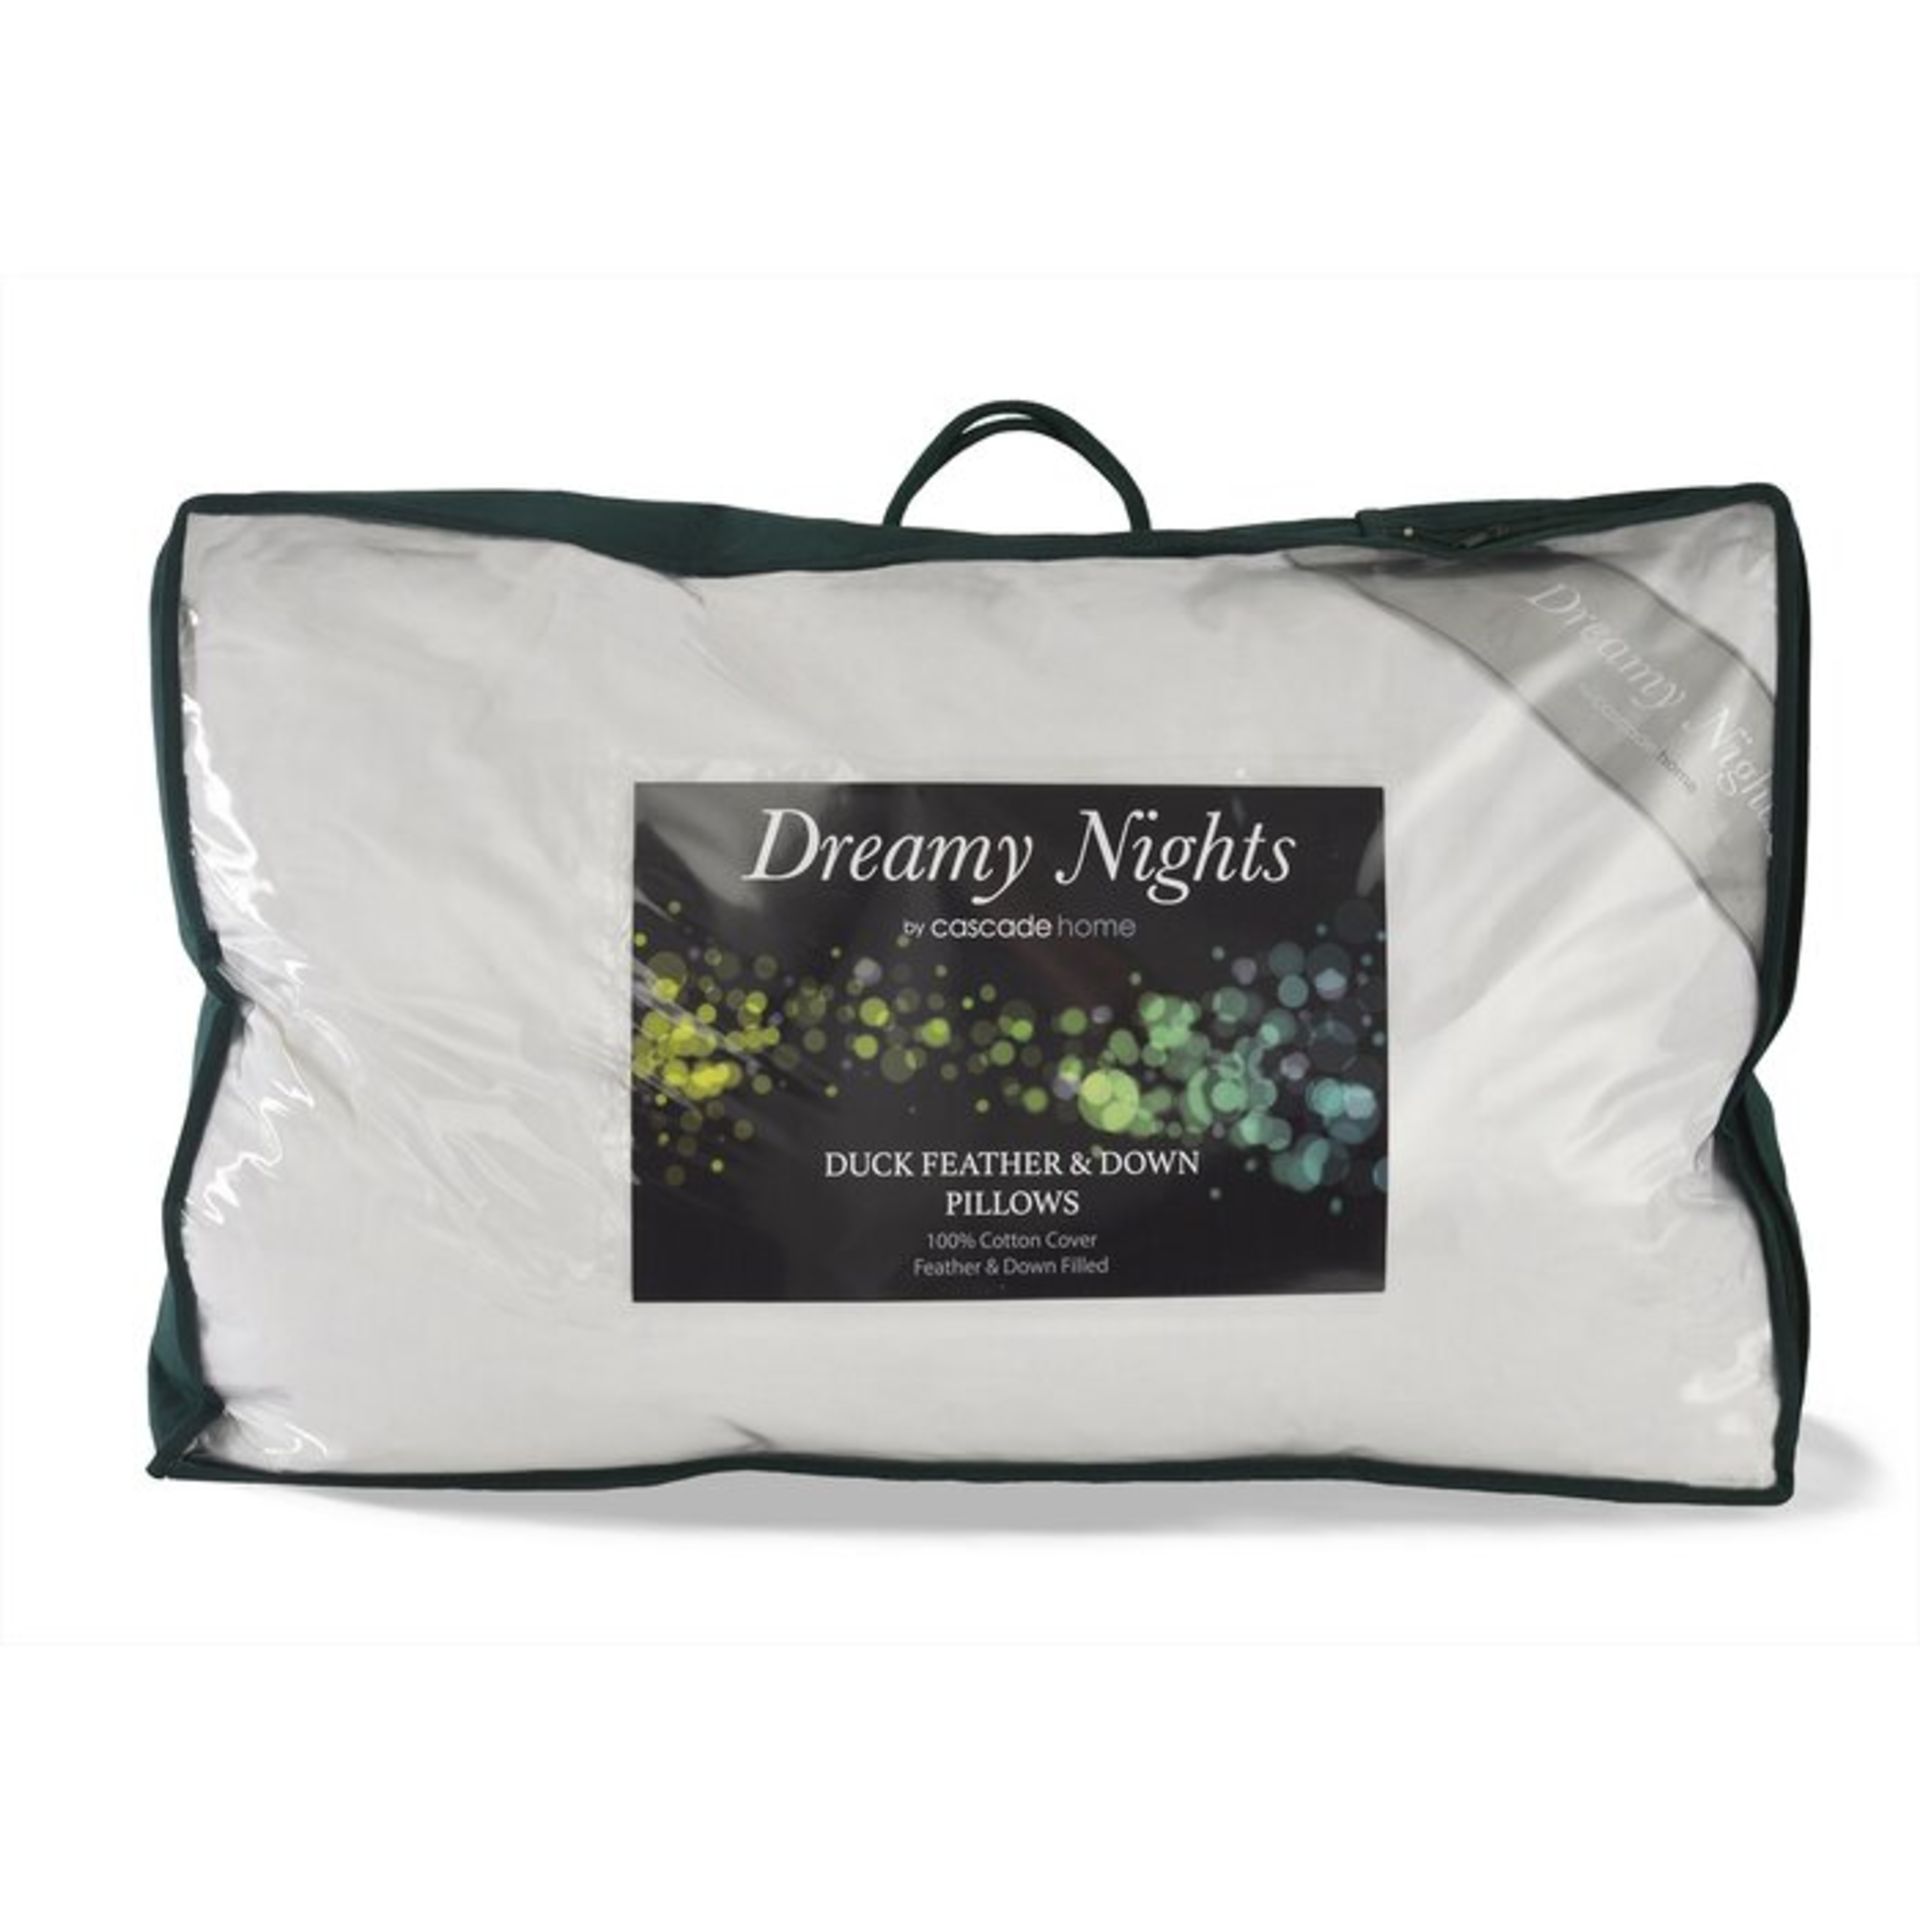 Duck Feather Down Pillow (Set of 2) - RRP £30.00